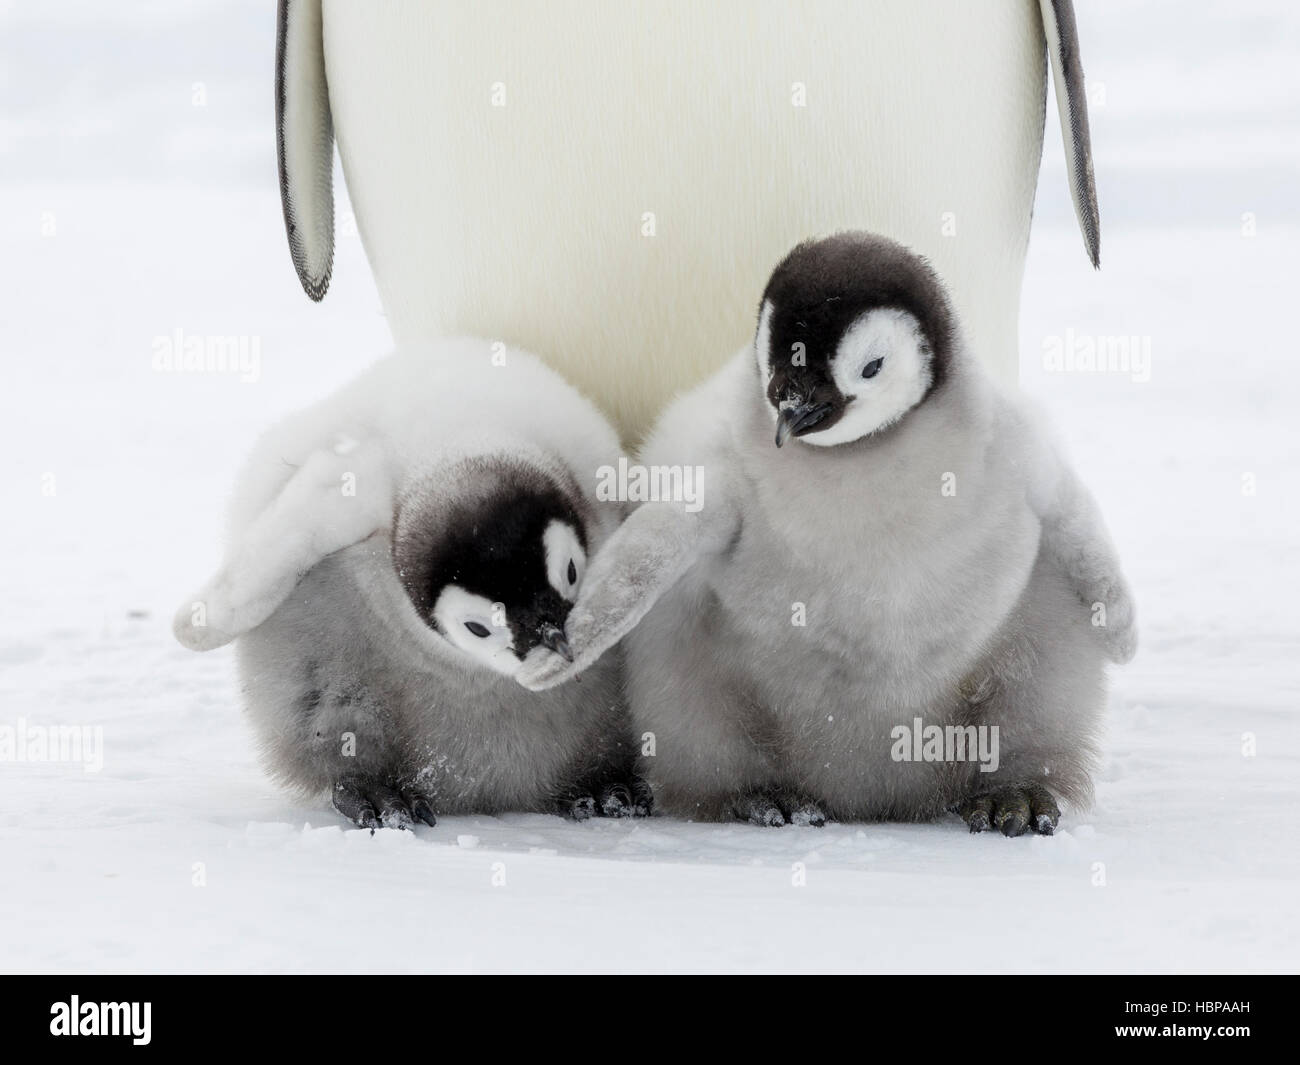 Emperor Penguin chicks at play Stock Photo